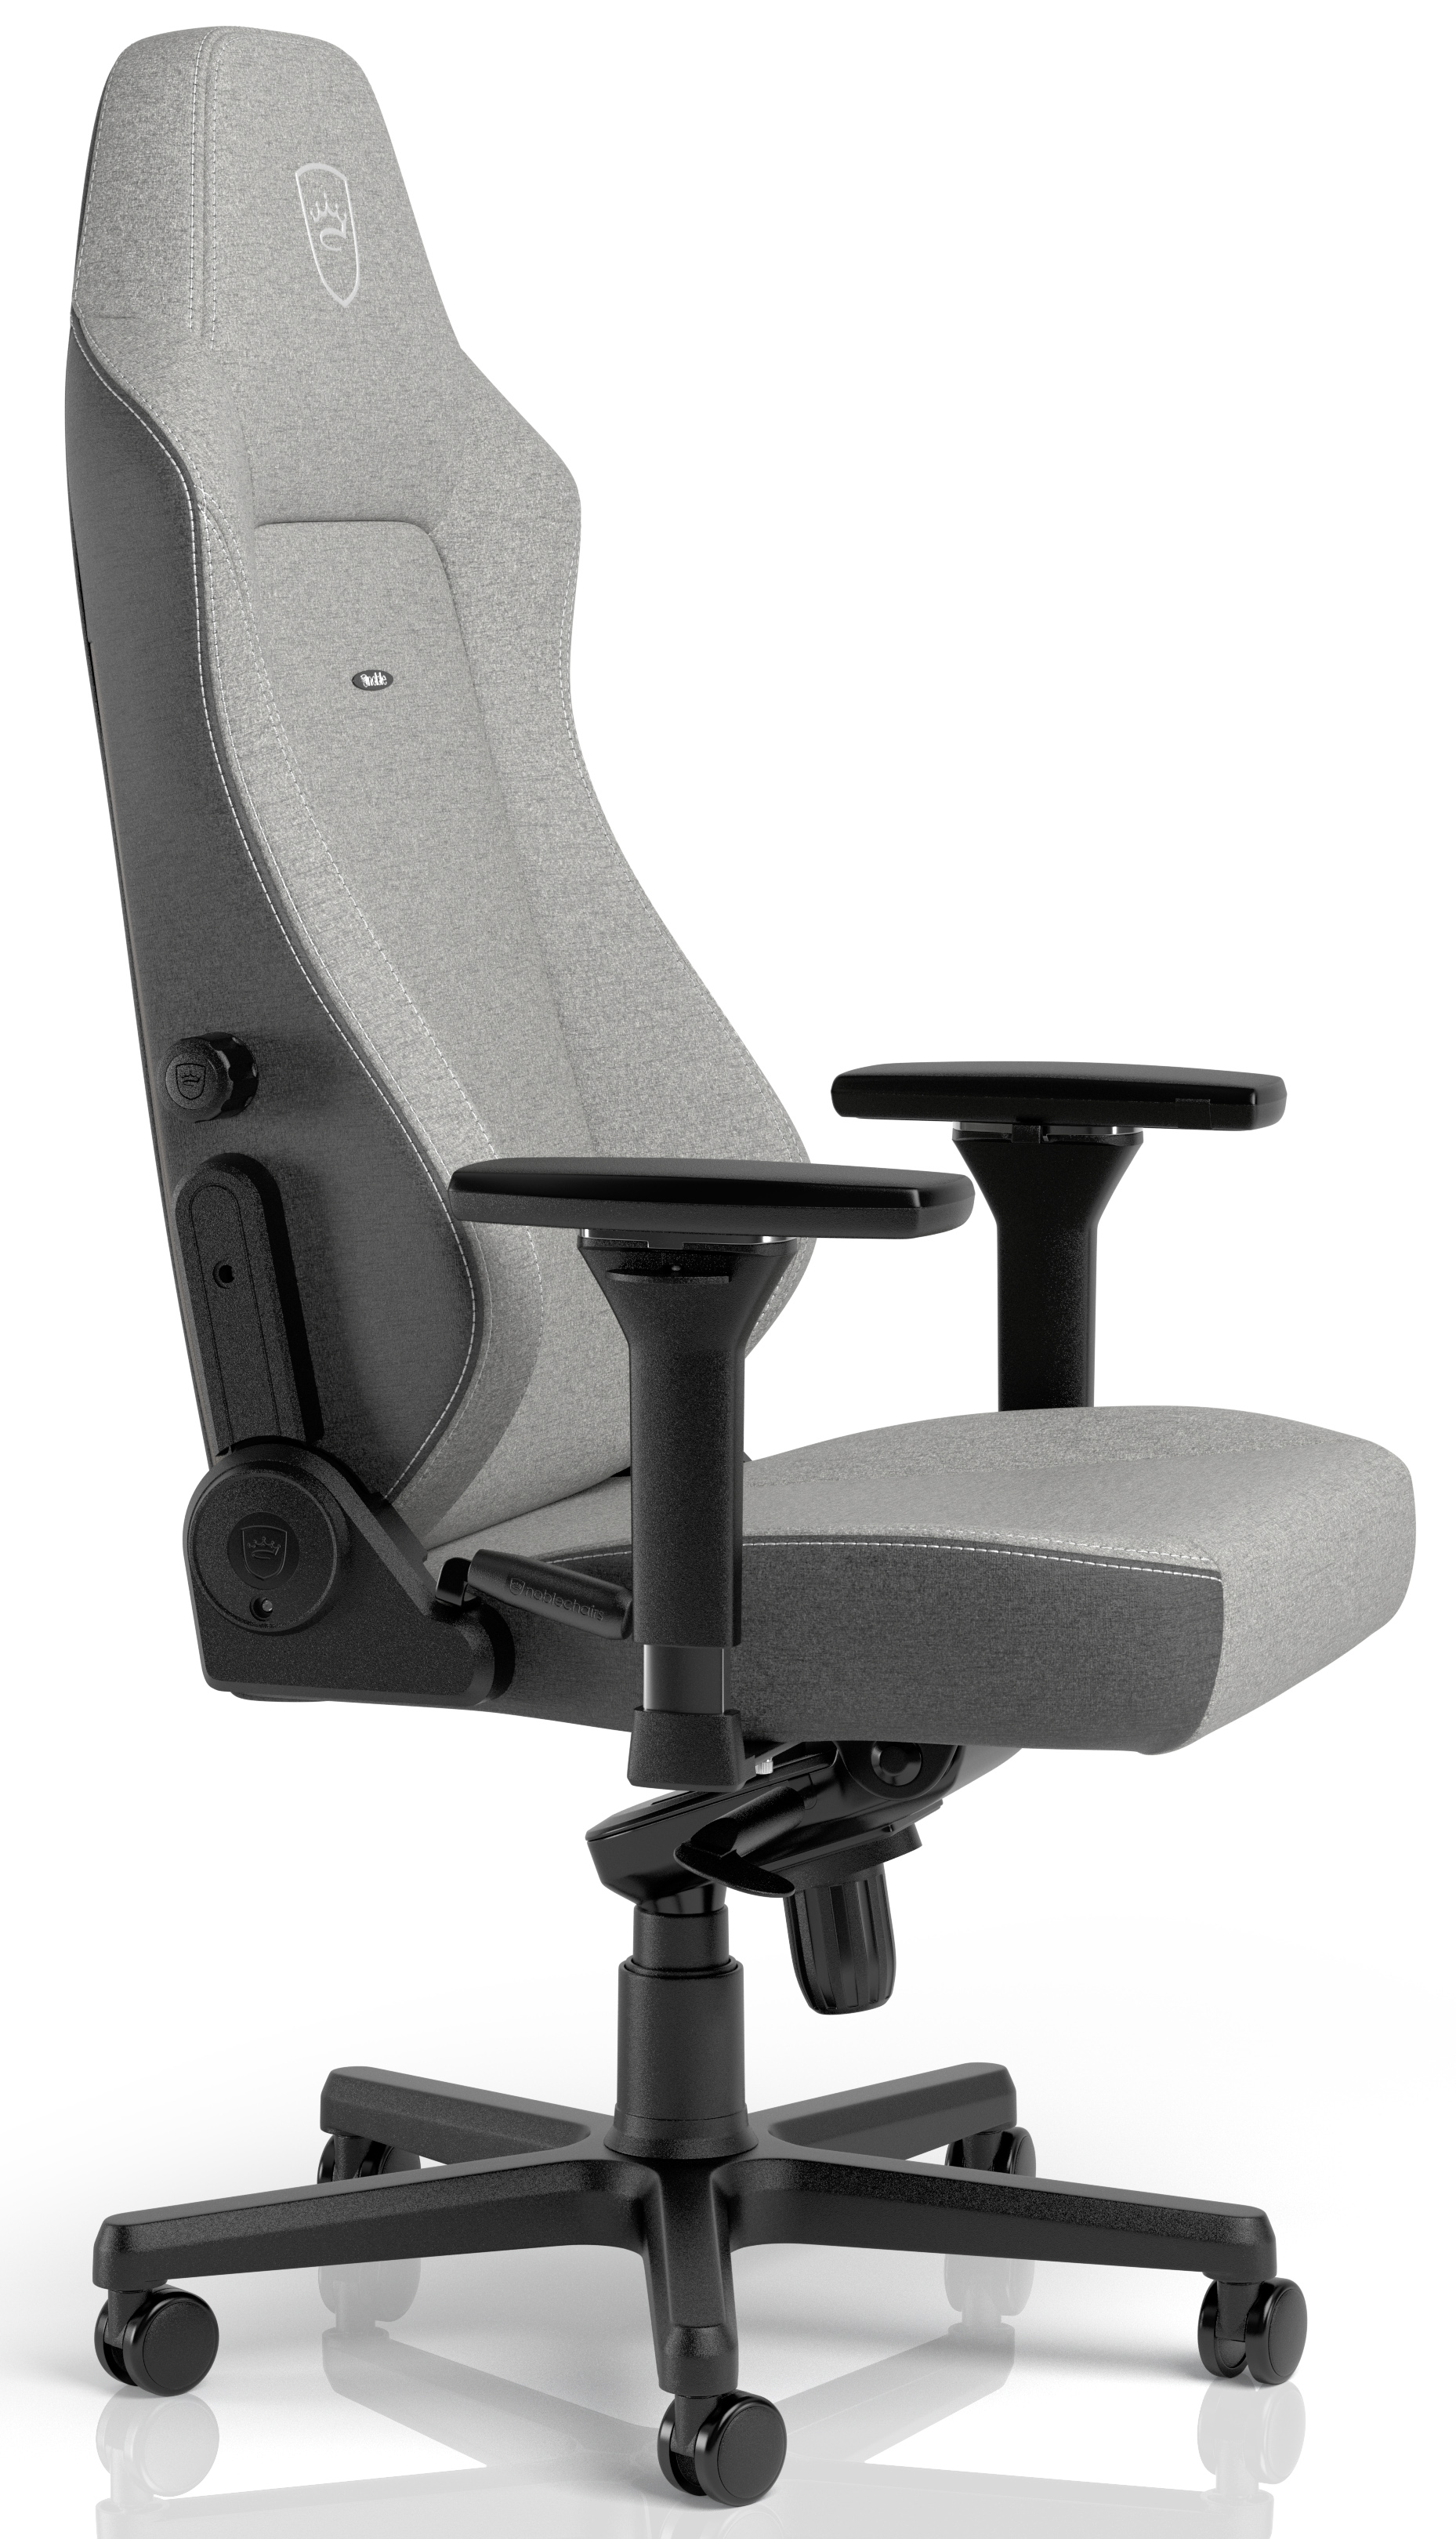 noblechairs - ** B Grade ** Silla noblechairs Hero Two Tone - Gray Limited Edition